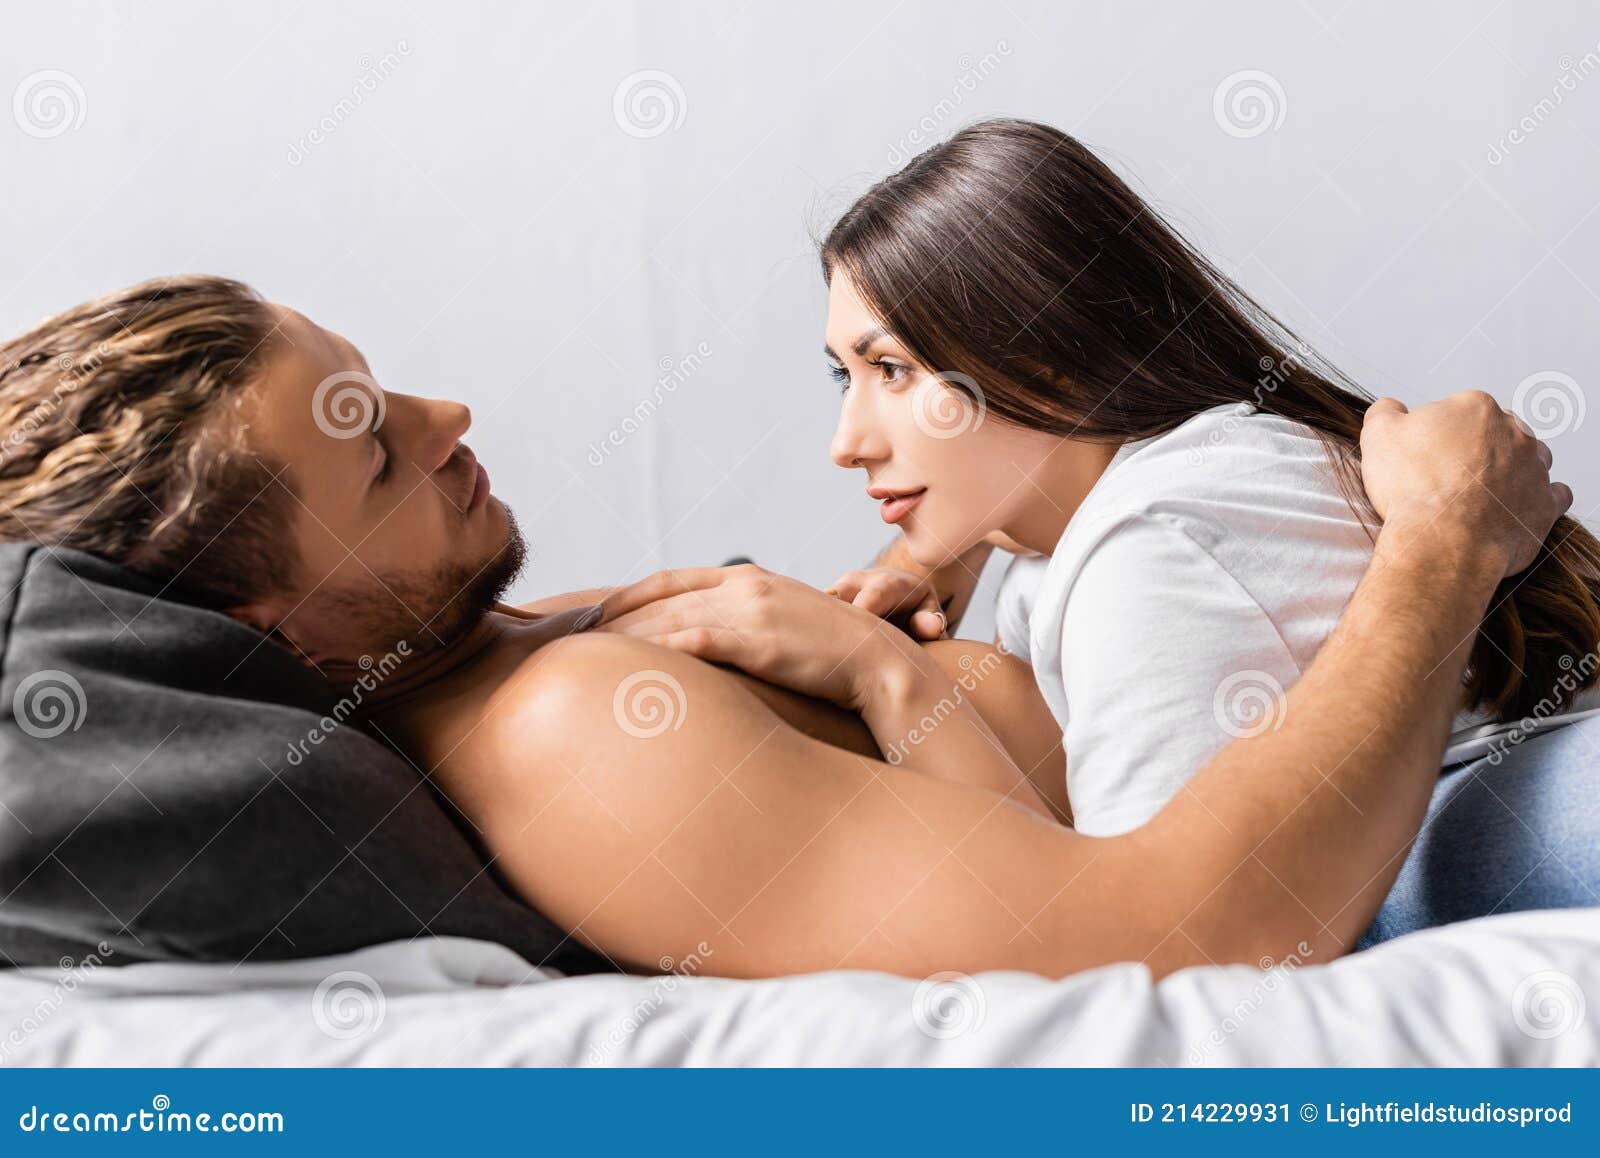 183 Sexy Sensual Couple Bed Brunette Stock Photos - Free